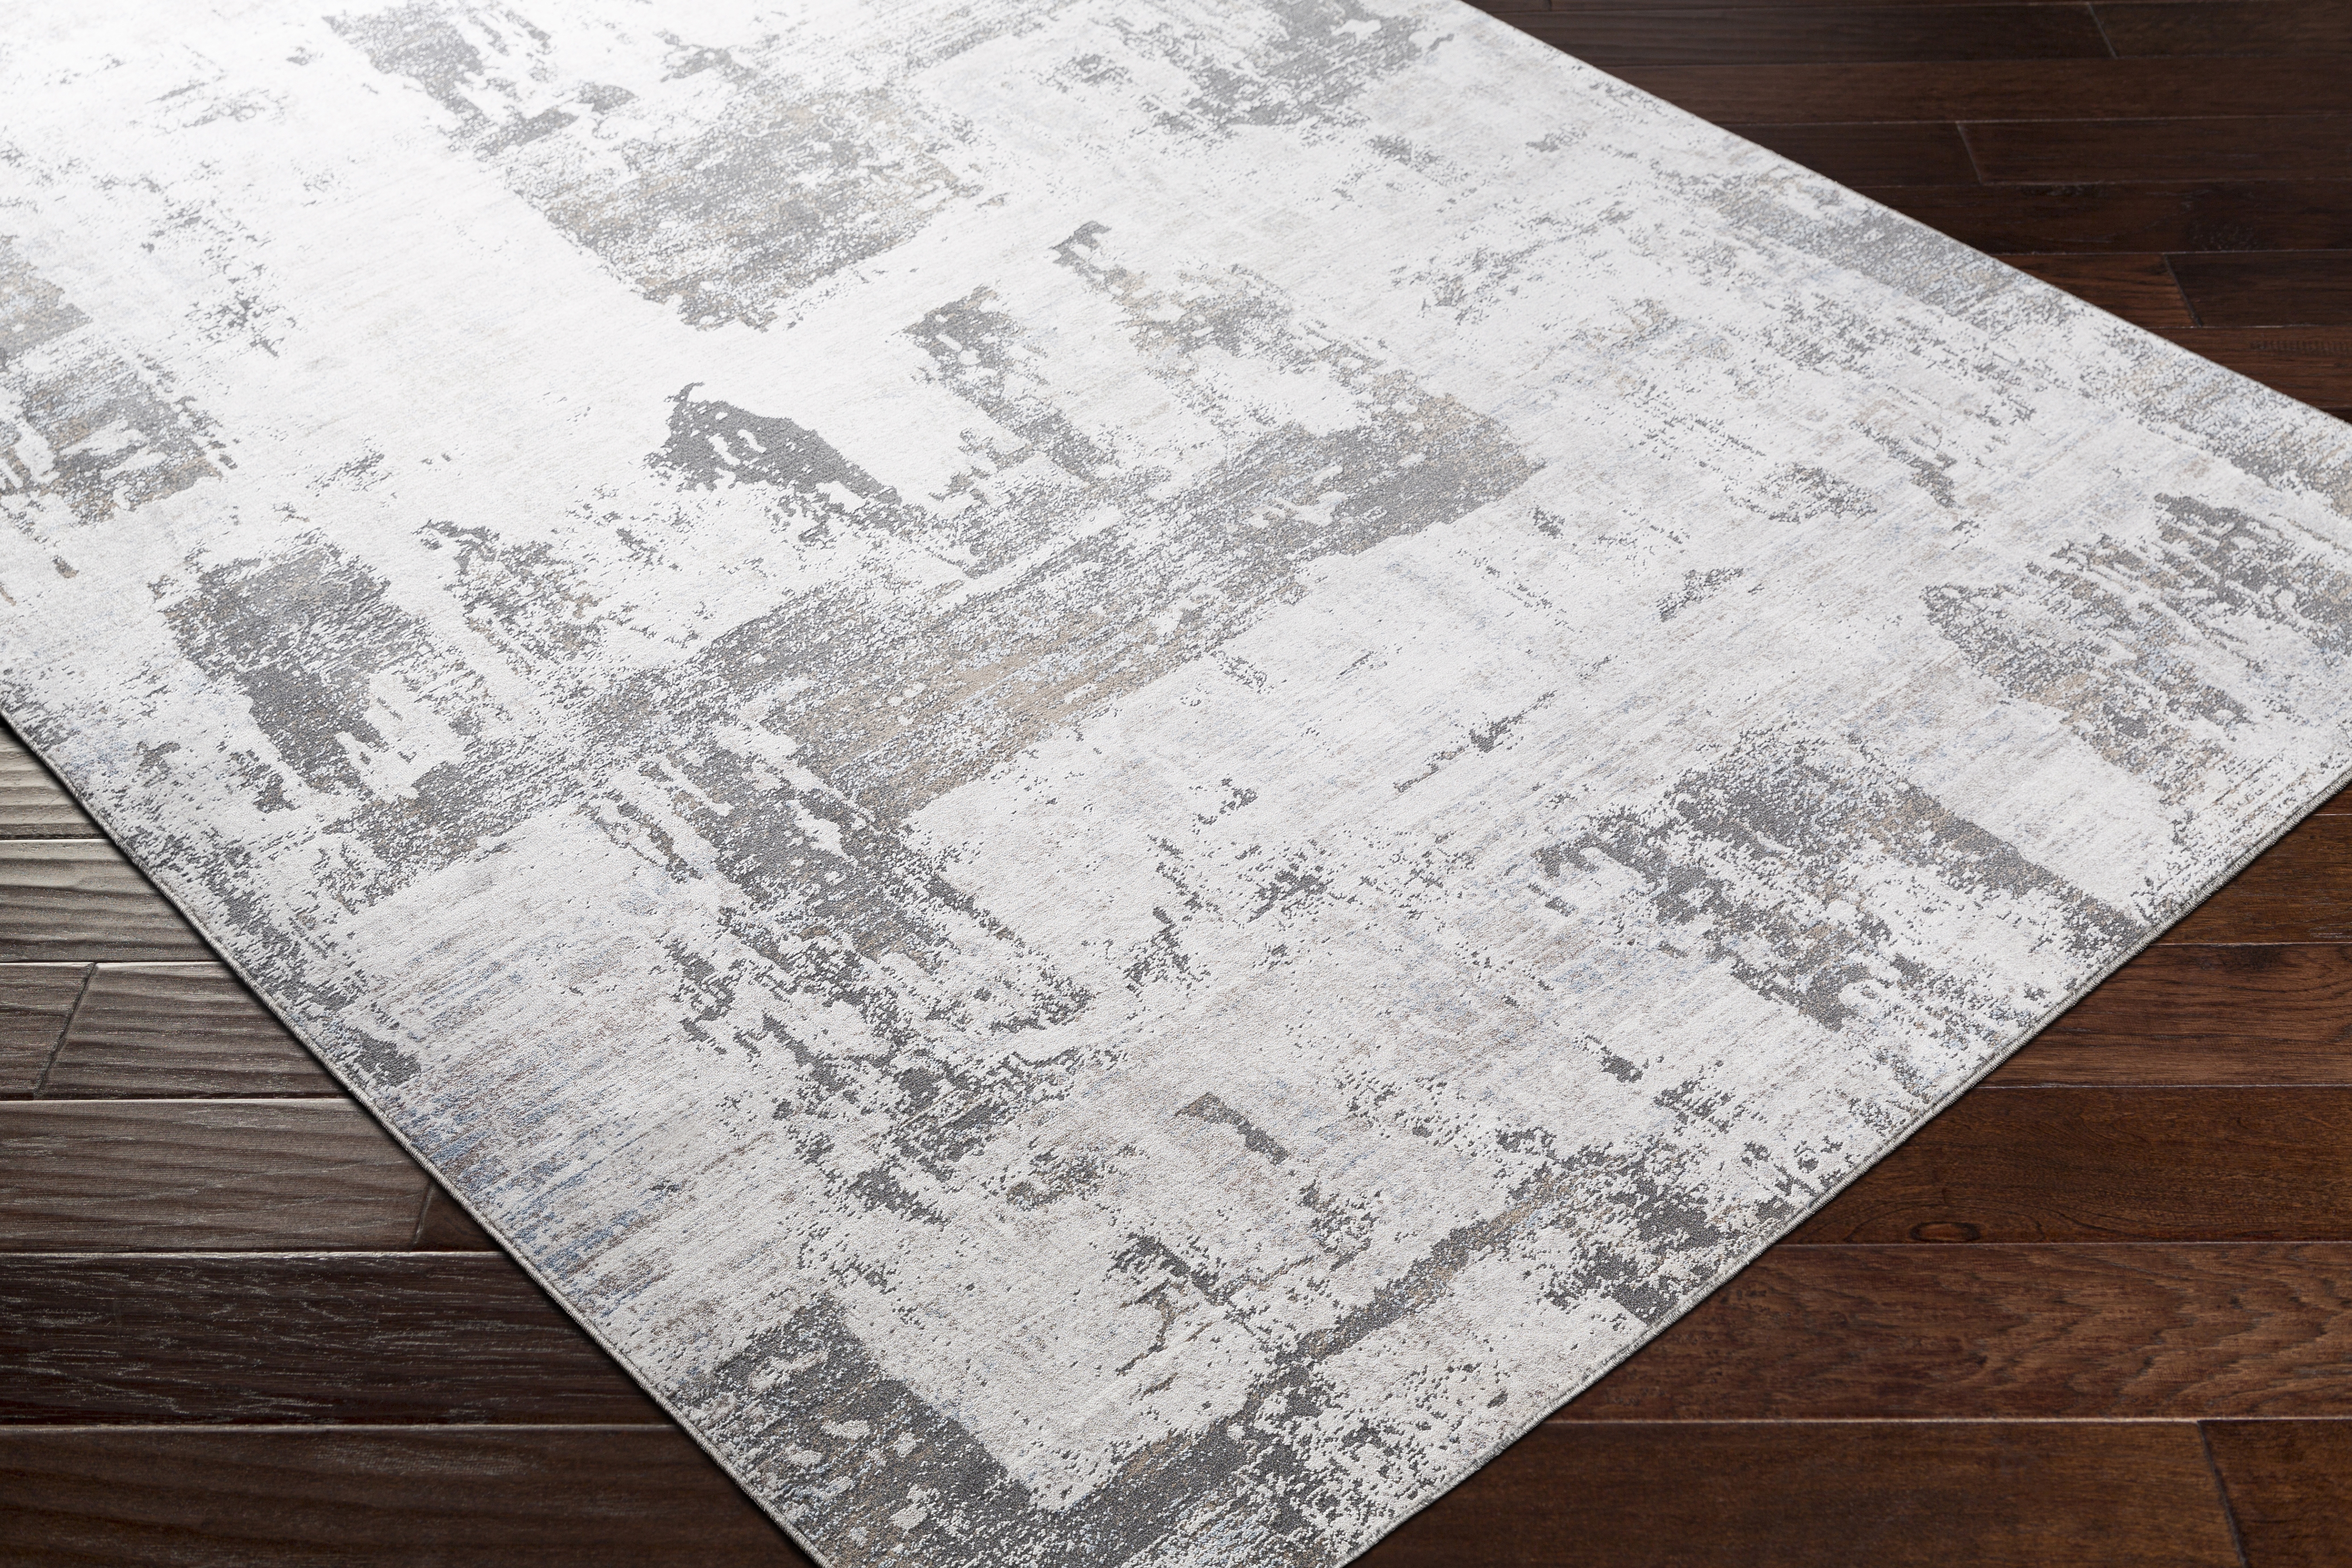 Couture Rug, 2' x 3' - Image 2